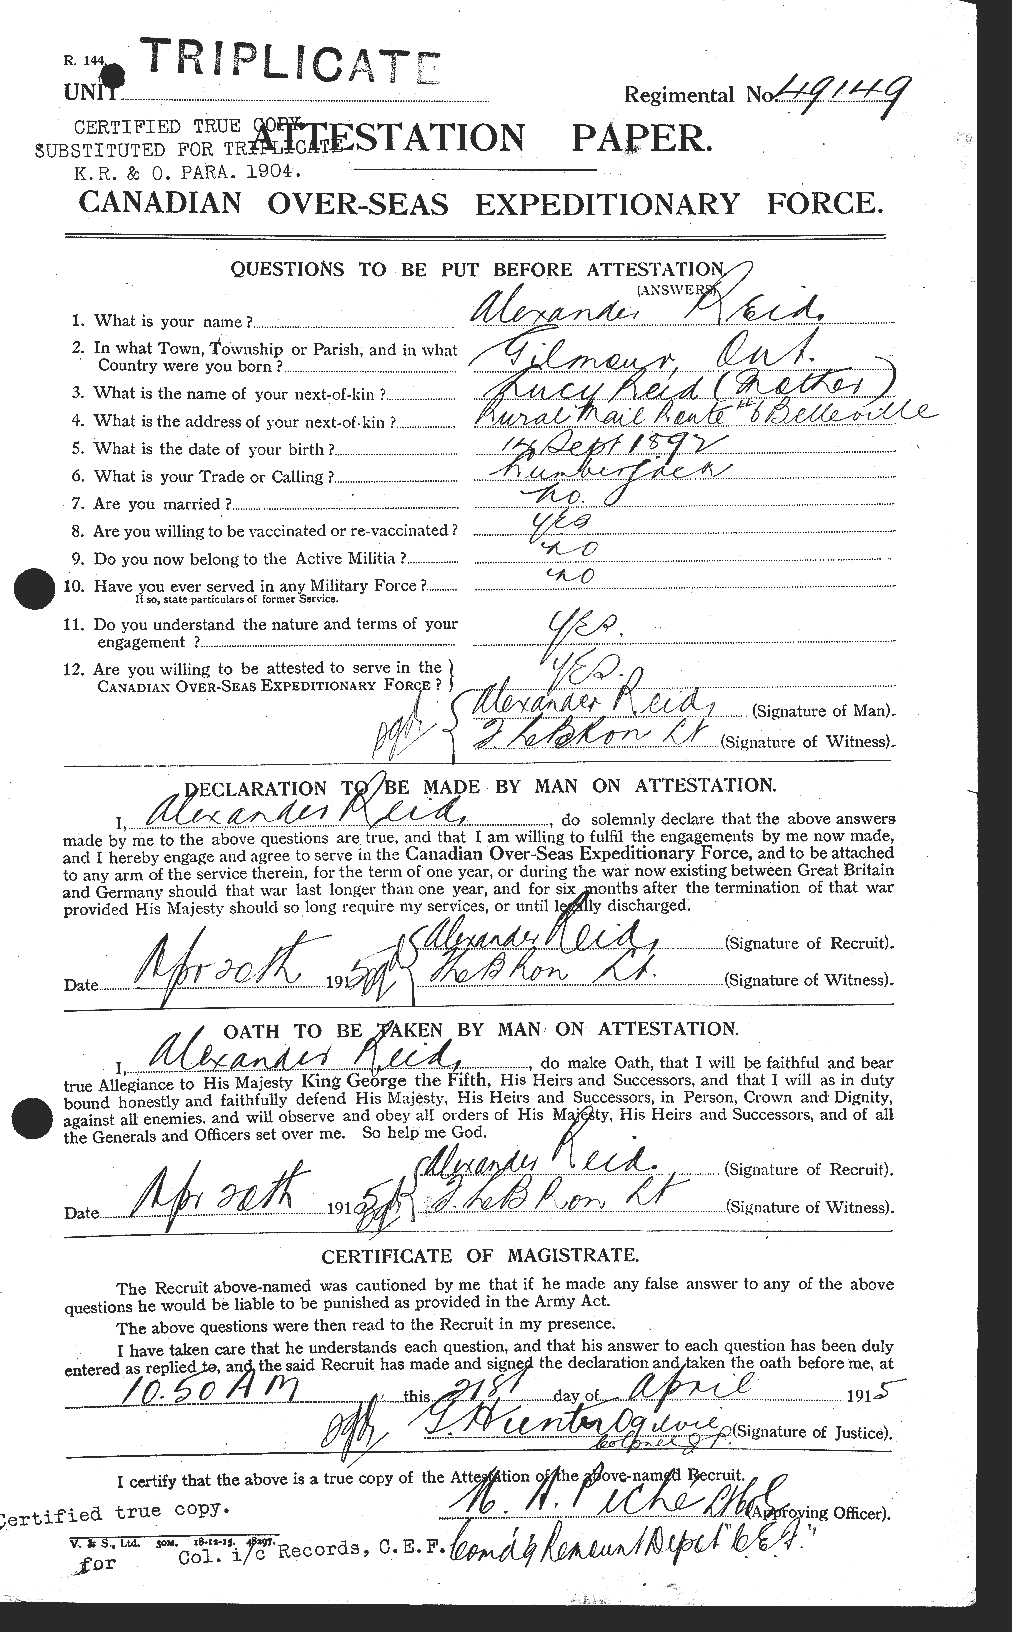 Personnel Records of the First World War - CEF 597758a